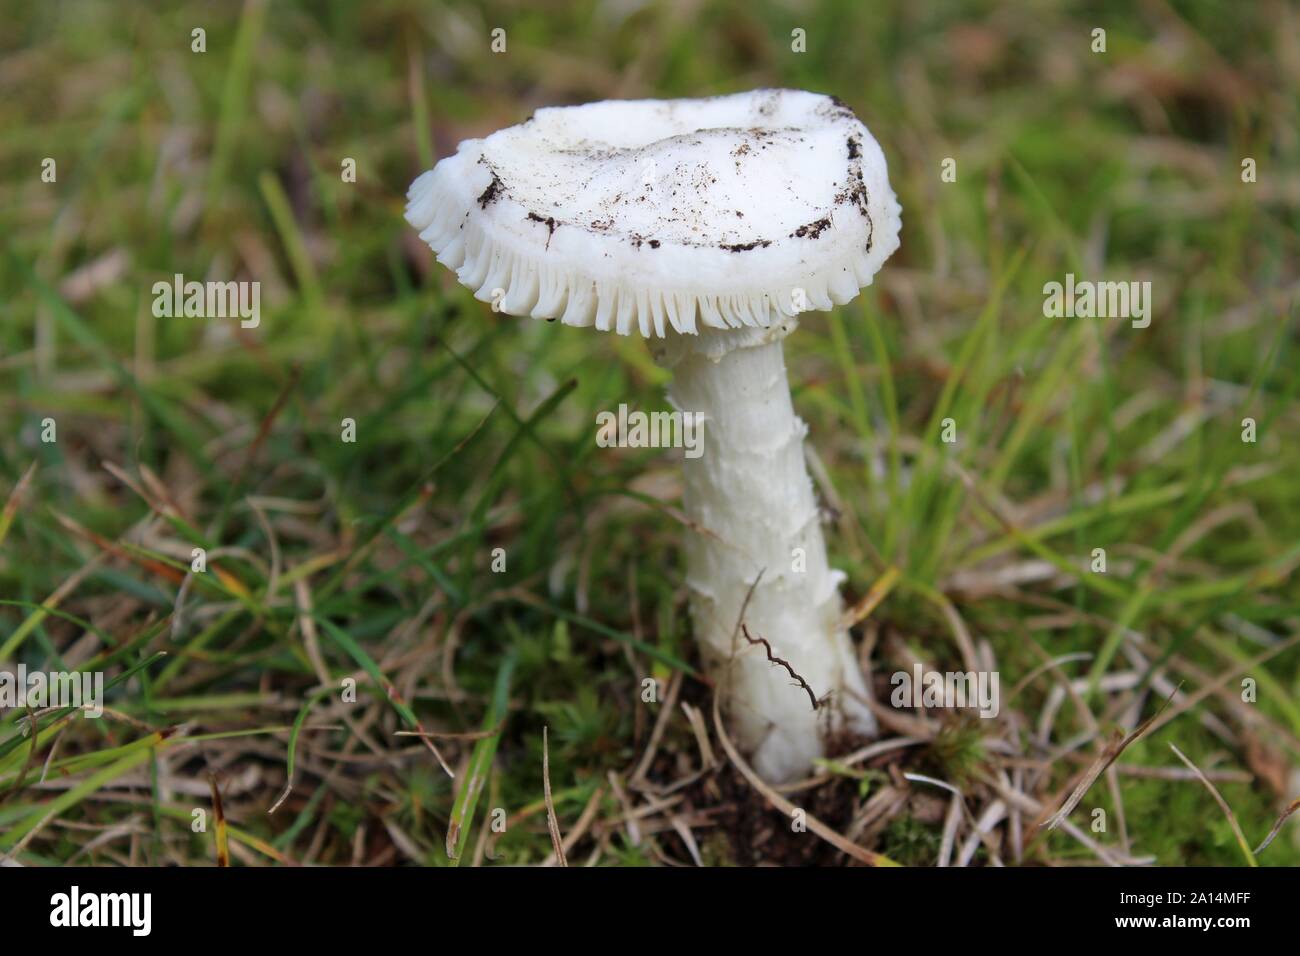 A White Frilly Mushroom In The Grass Stock Photo